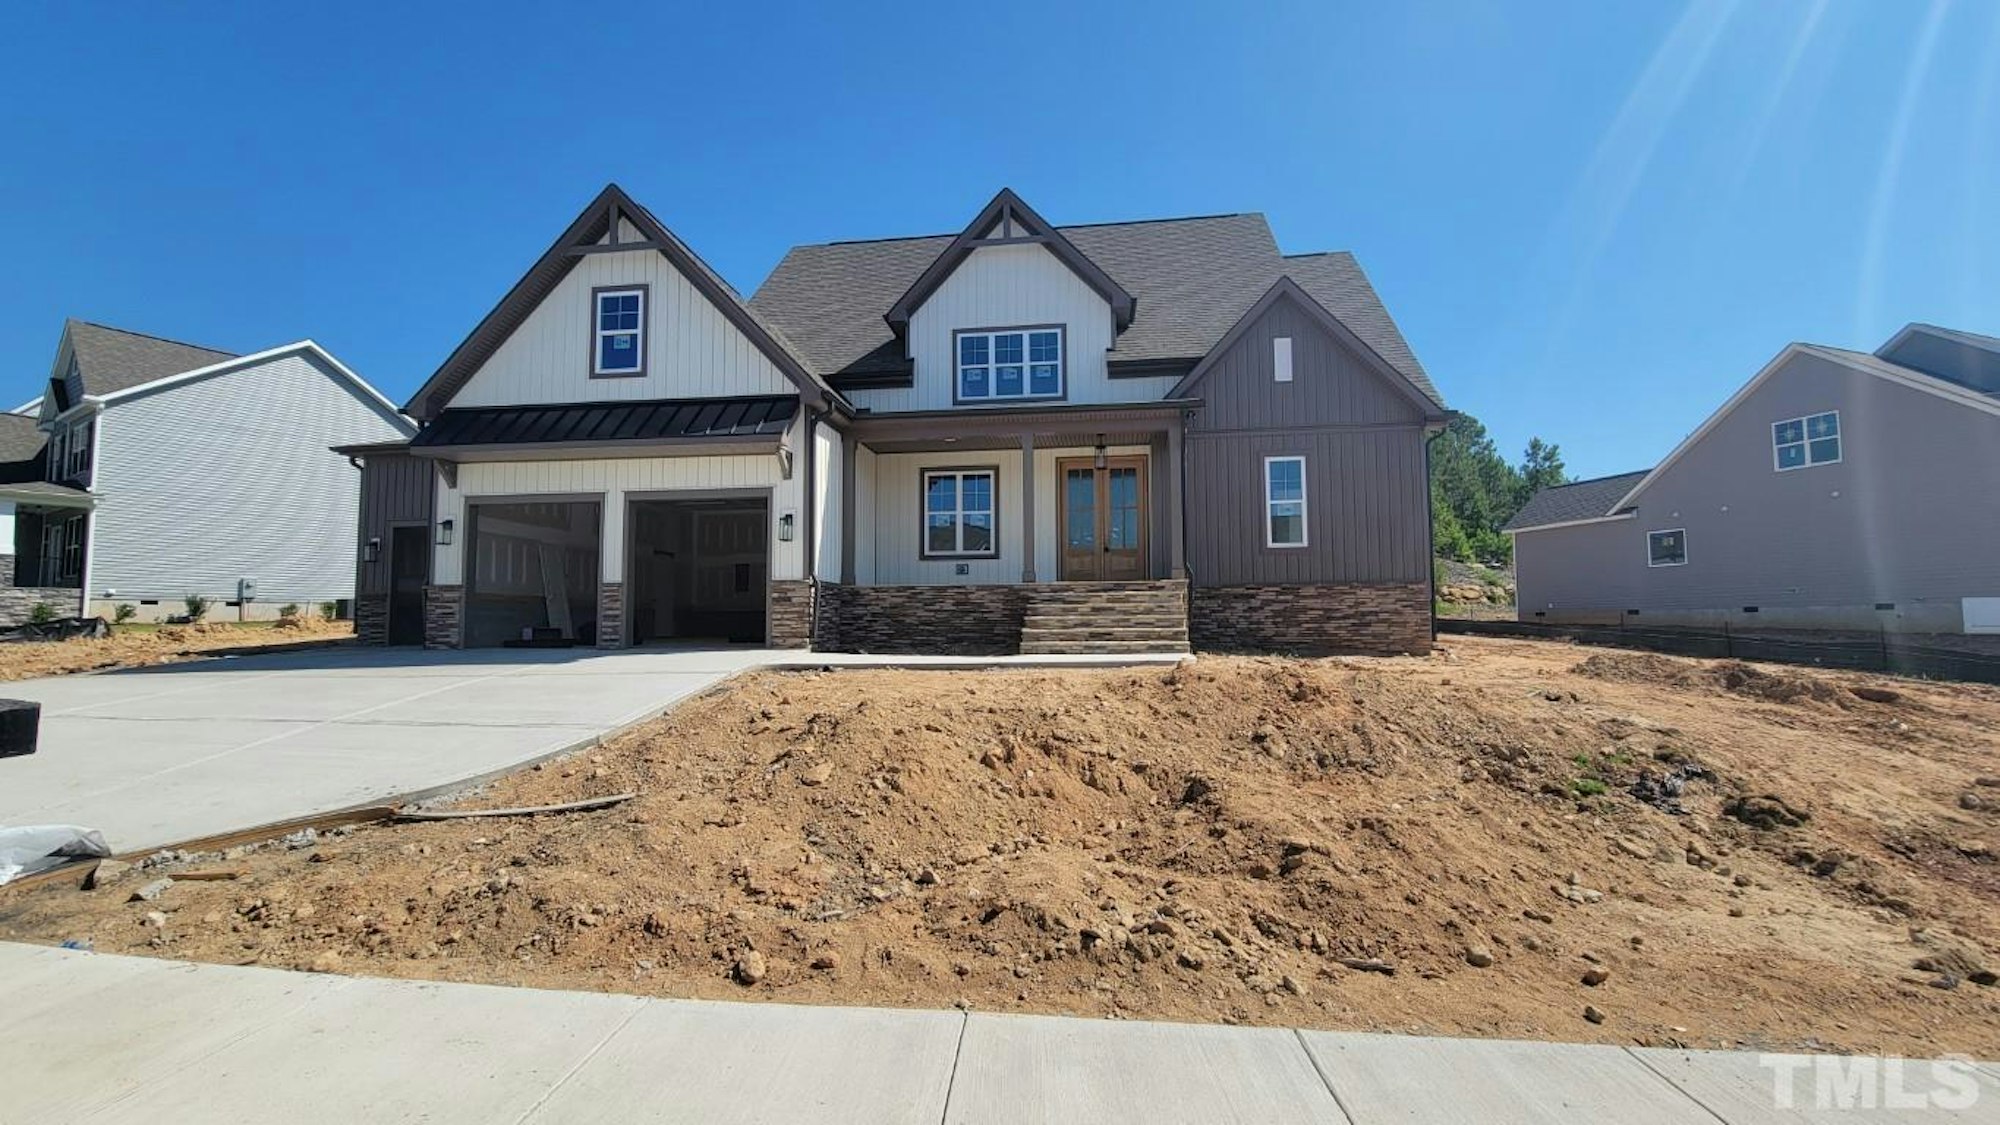 Photo 1 of 46 - 333 Prides Xing, Rolesville, NC 27571